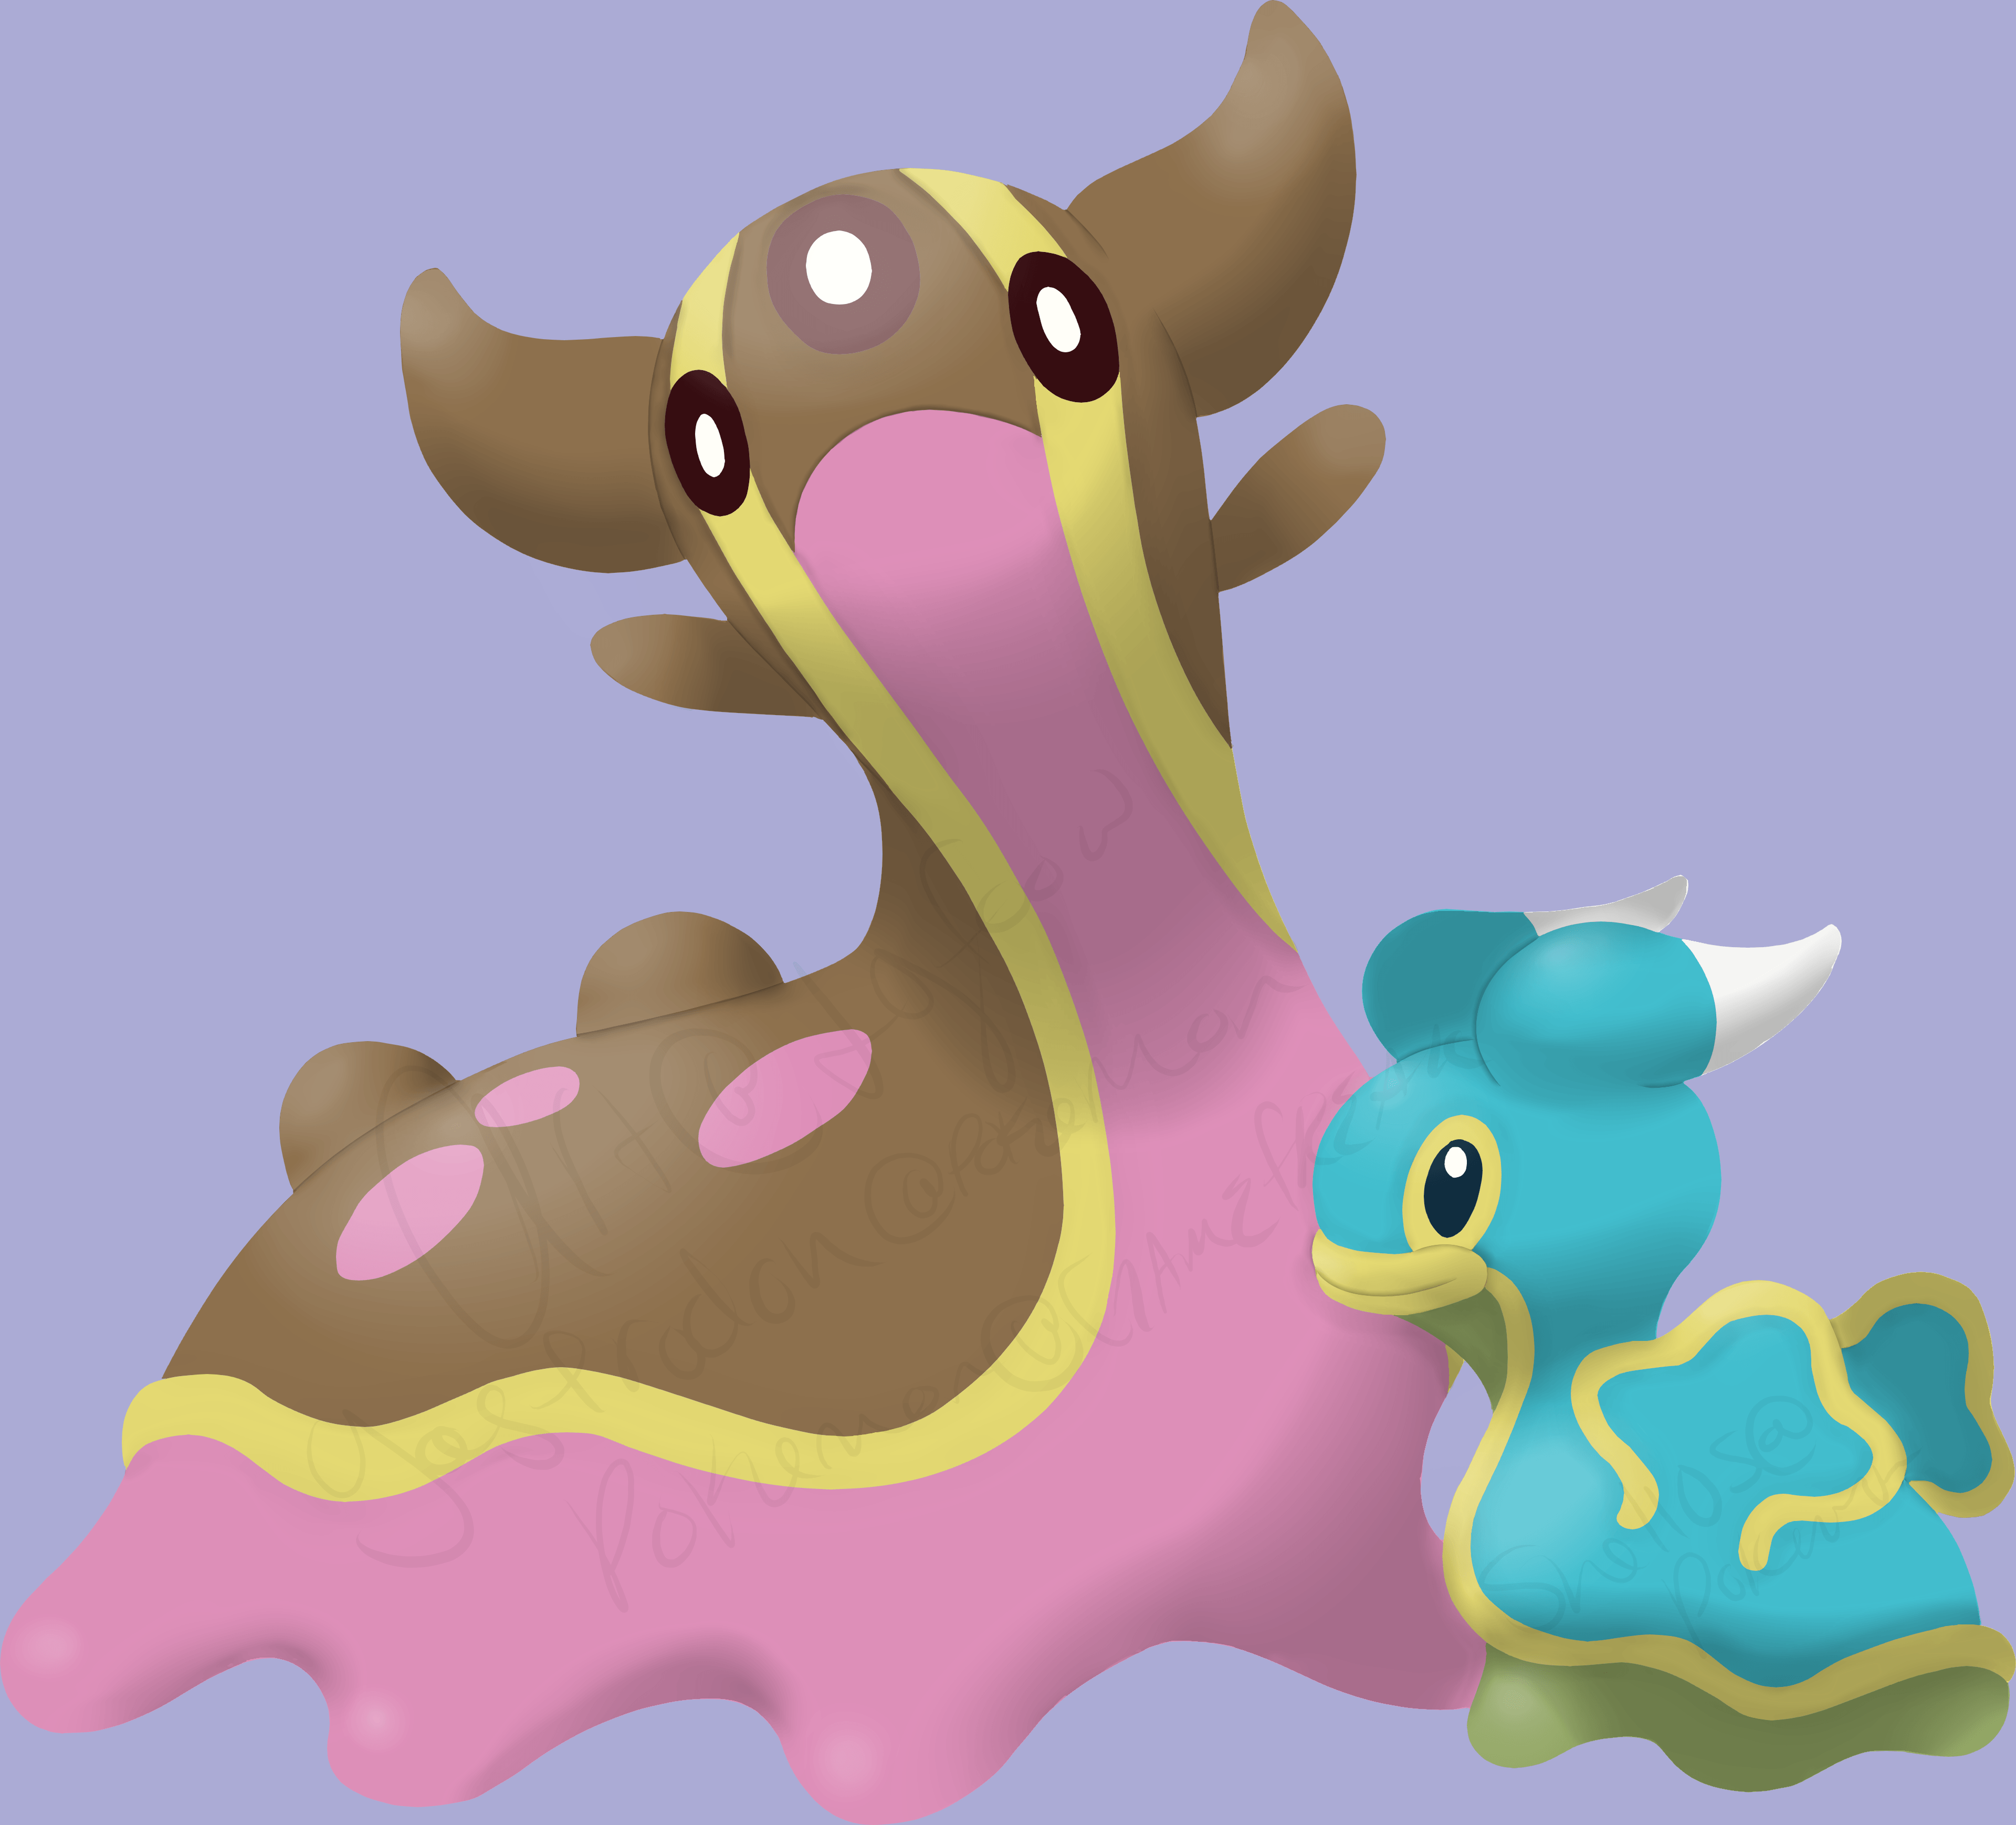 OC) Gastrodon Shellos In Ken Sugimori's Style Mixed With My Own